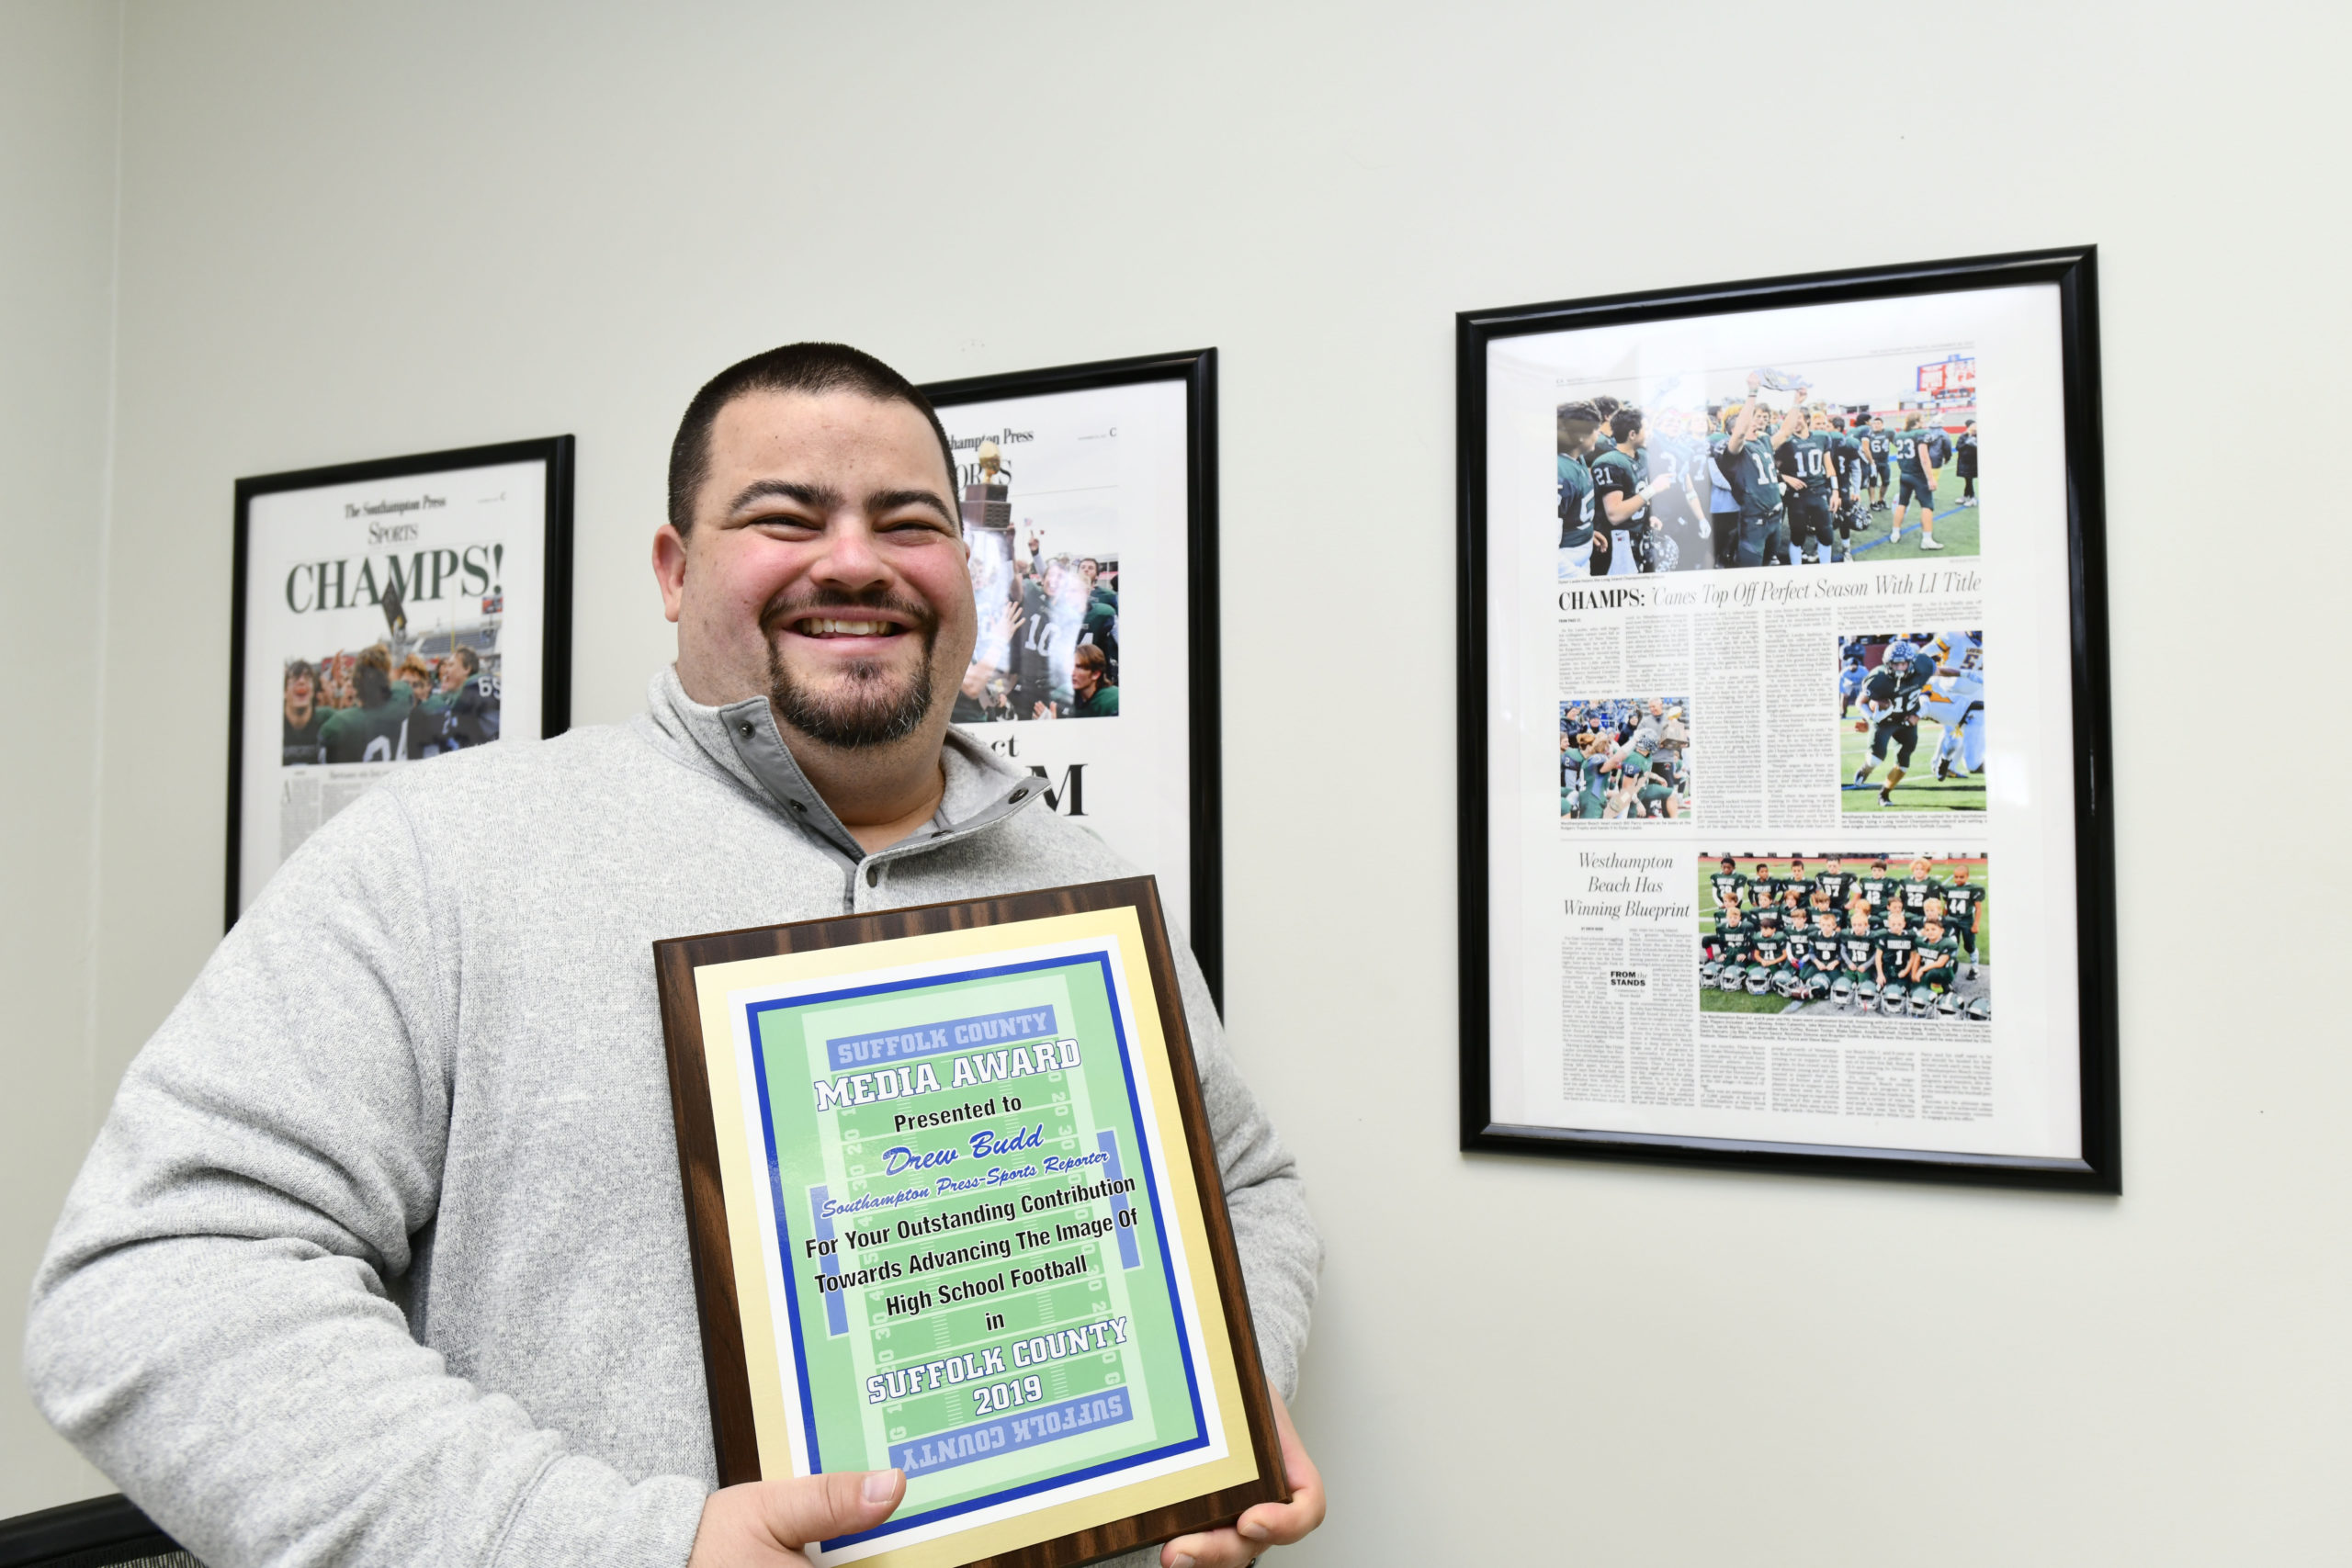 Express News Group Sports Editor Drew Budd was presented with the Suffolk County Football Coaches Association's Media Award at the Suffolk County Football Awards Dinner in Hauppauge on Monday, December 2. Westhampton Beach varsity football head coach Bryan Schaumloffel nominated him for the award, which is presented to someone within the media who shows 